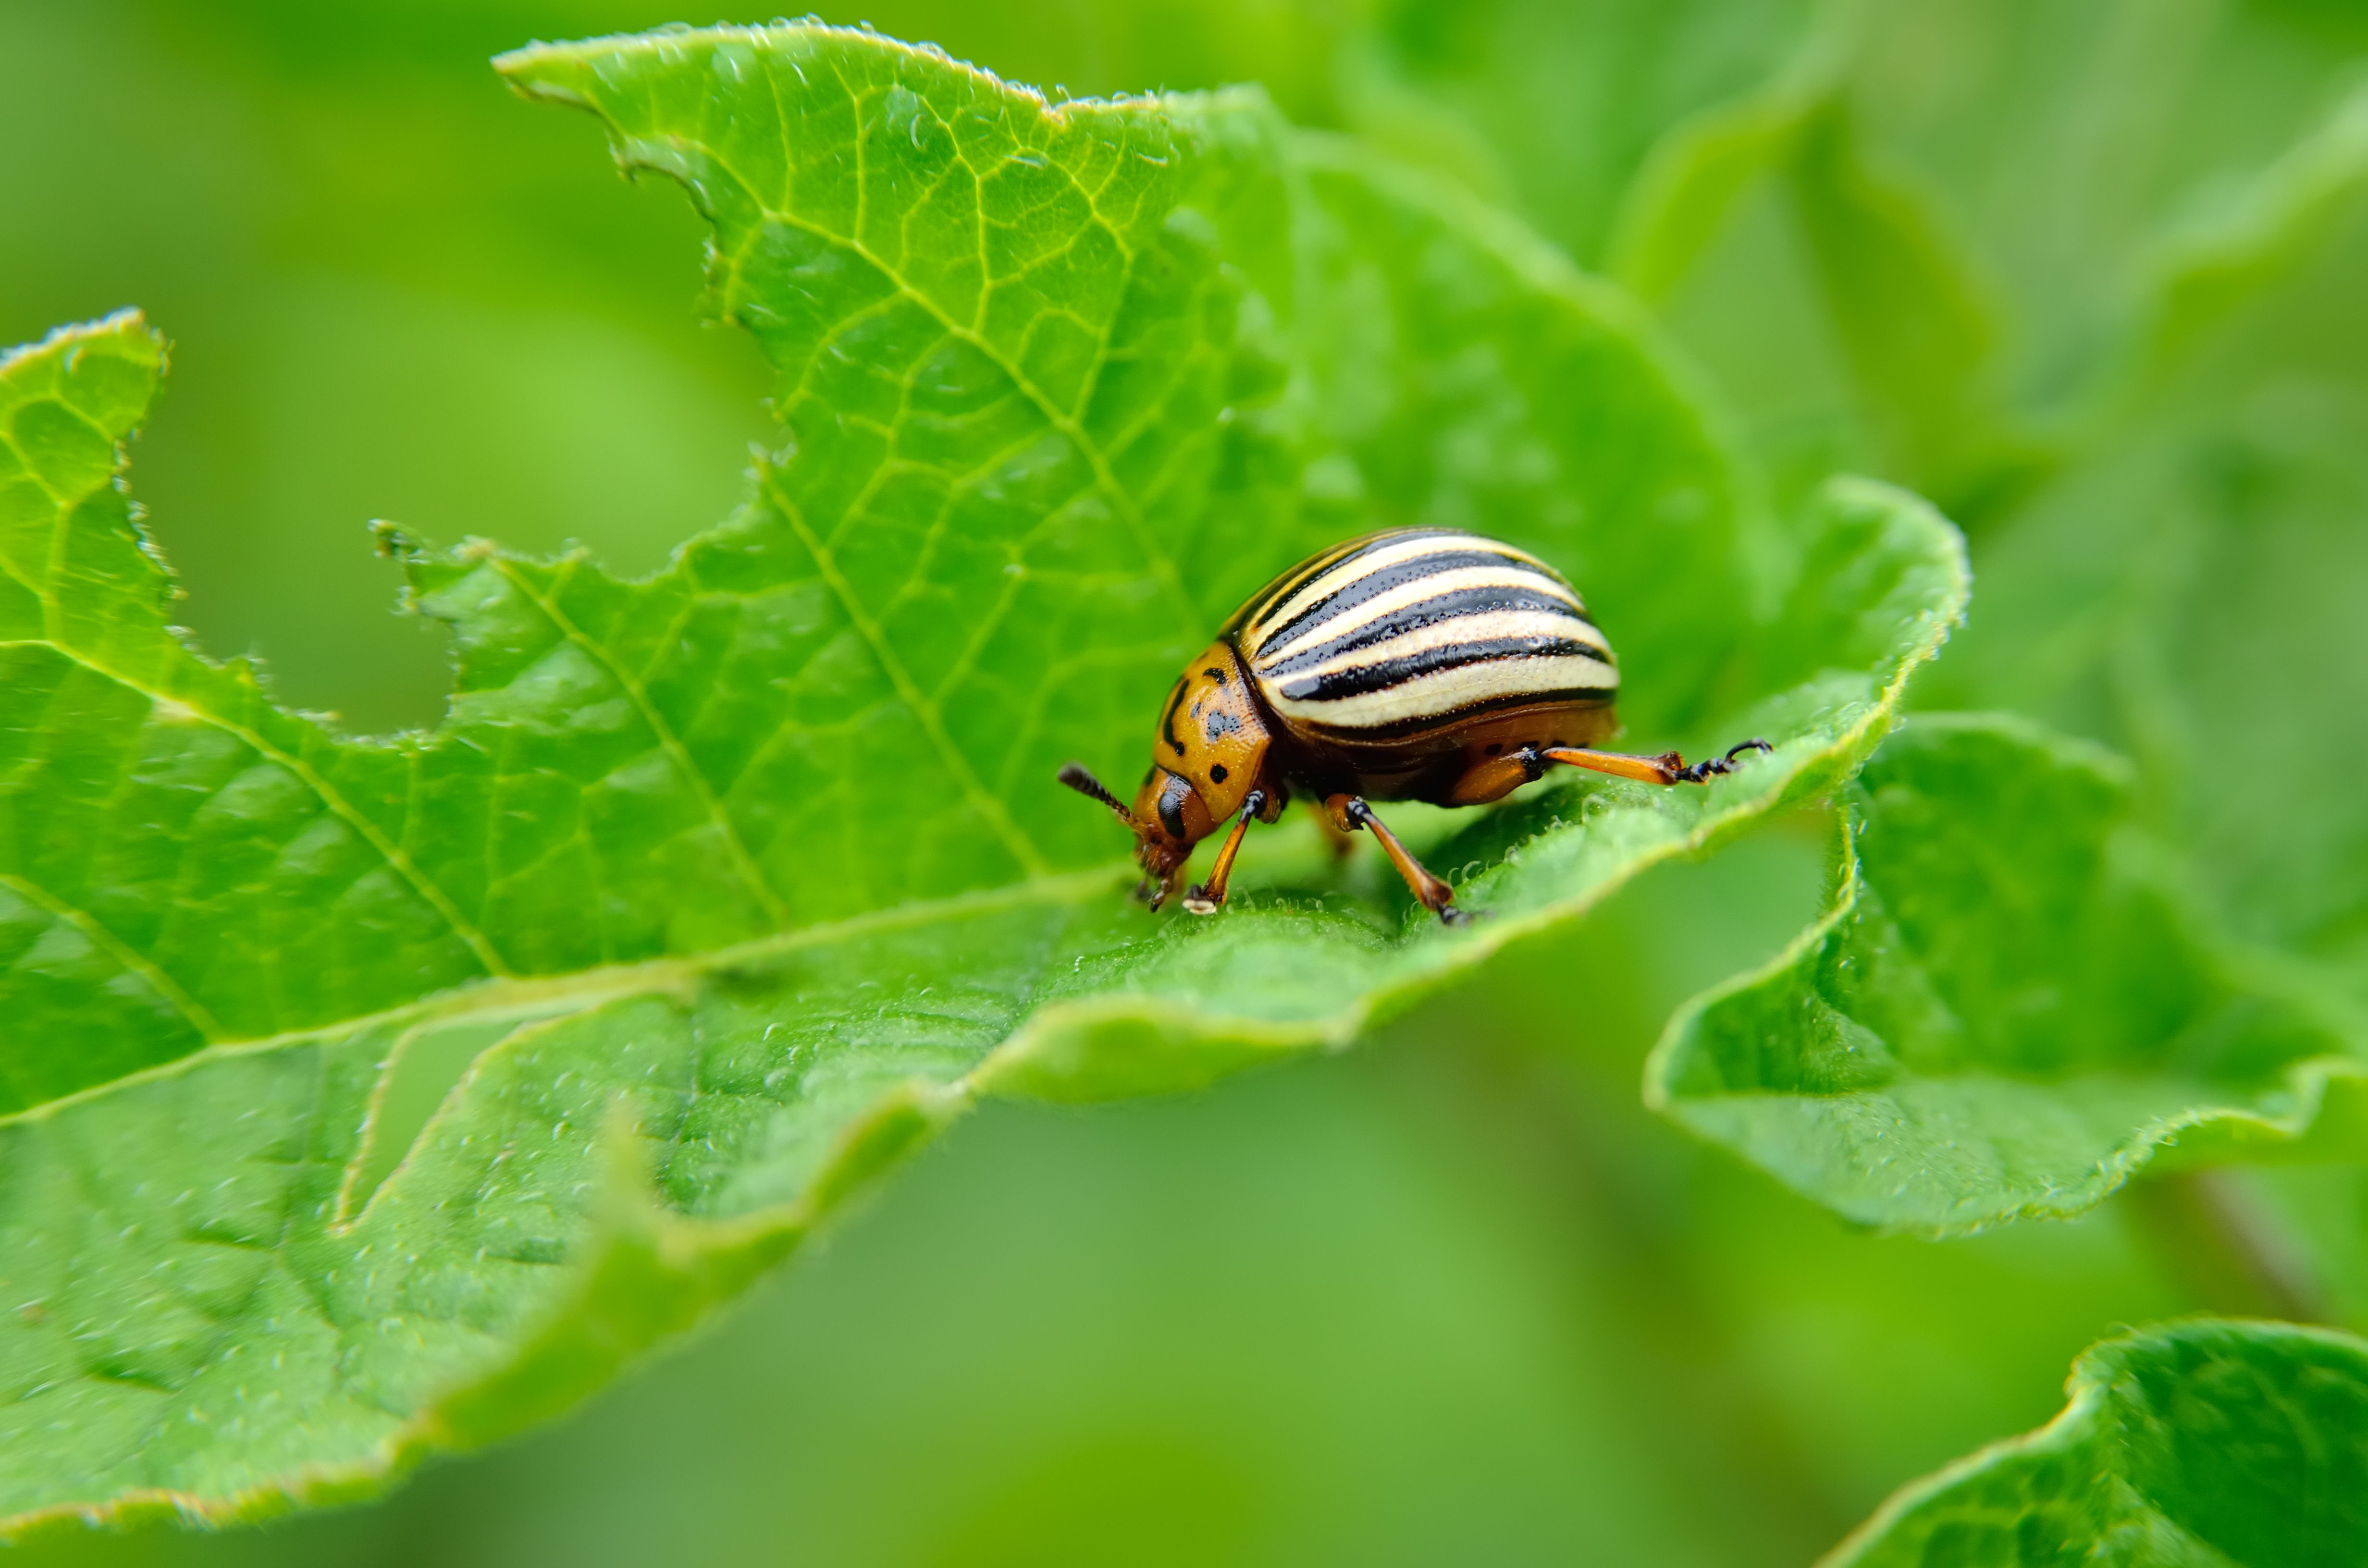 10 Most Destructive Garden Pests - How to Keep Common Bugs Out of Garden